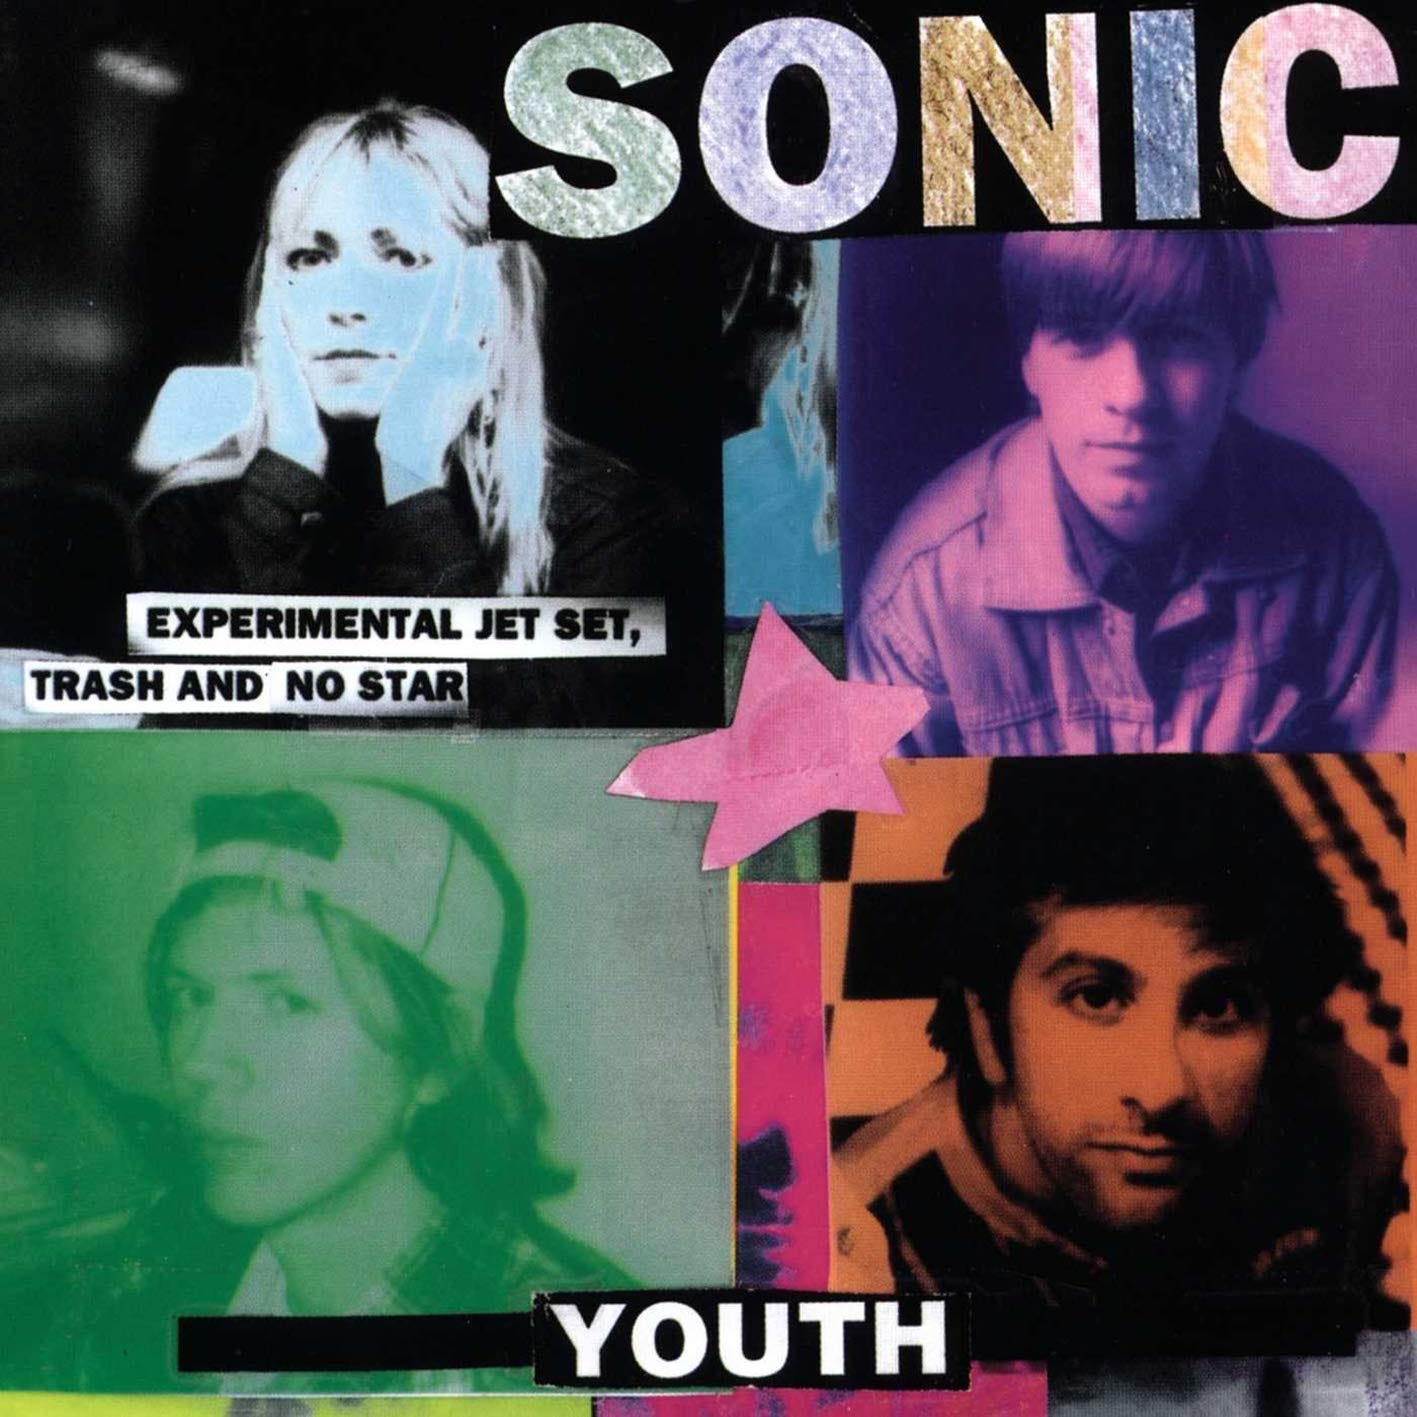 Sonic Youth - Experimental Jet Set, Trash And No Star [LP] - Amazon.com  Music